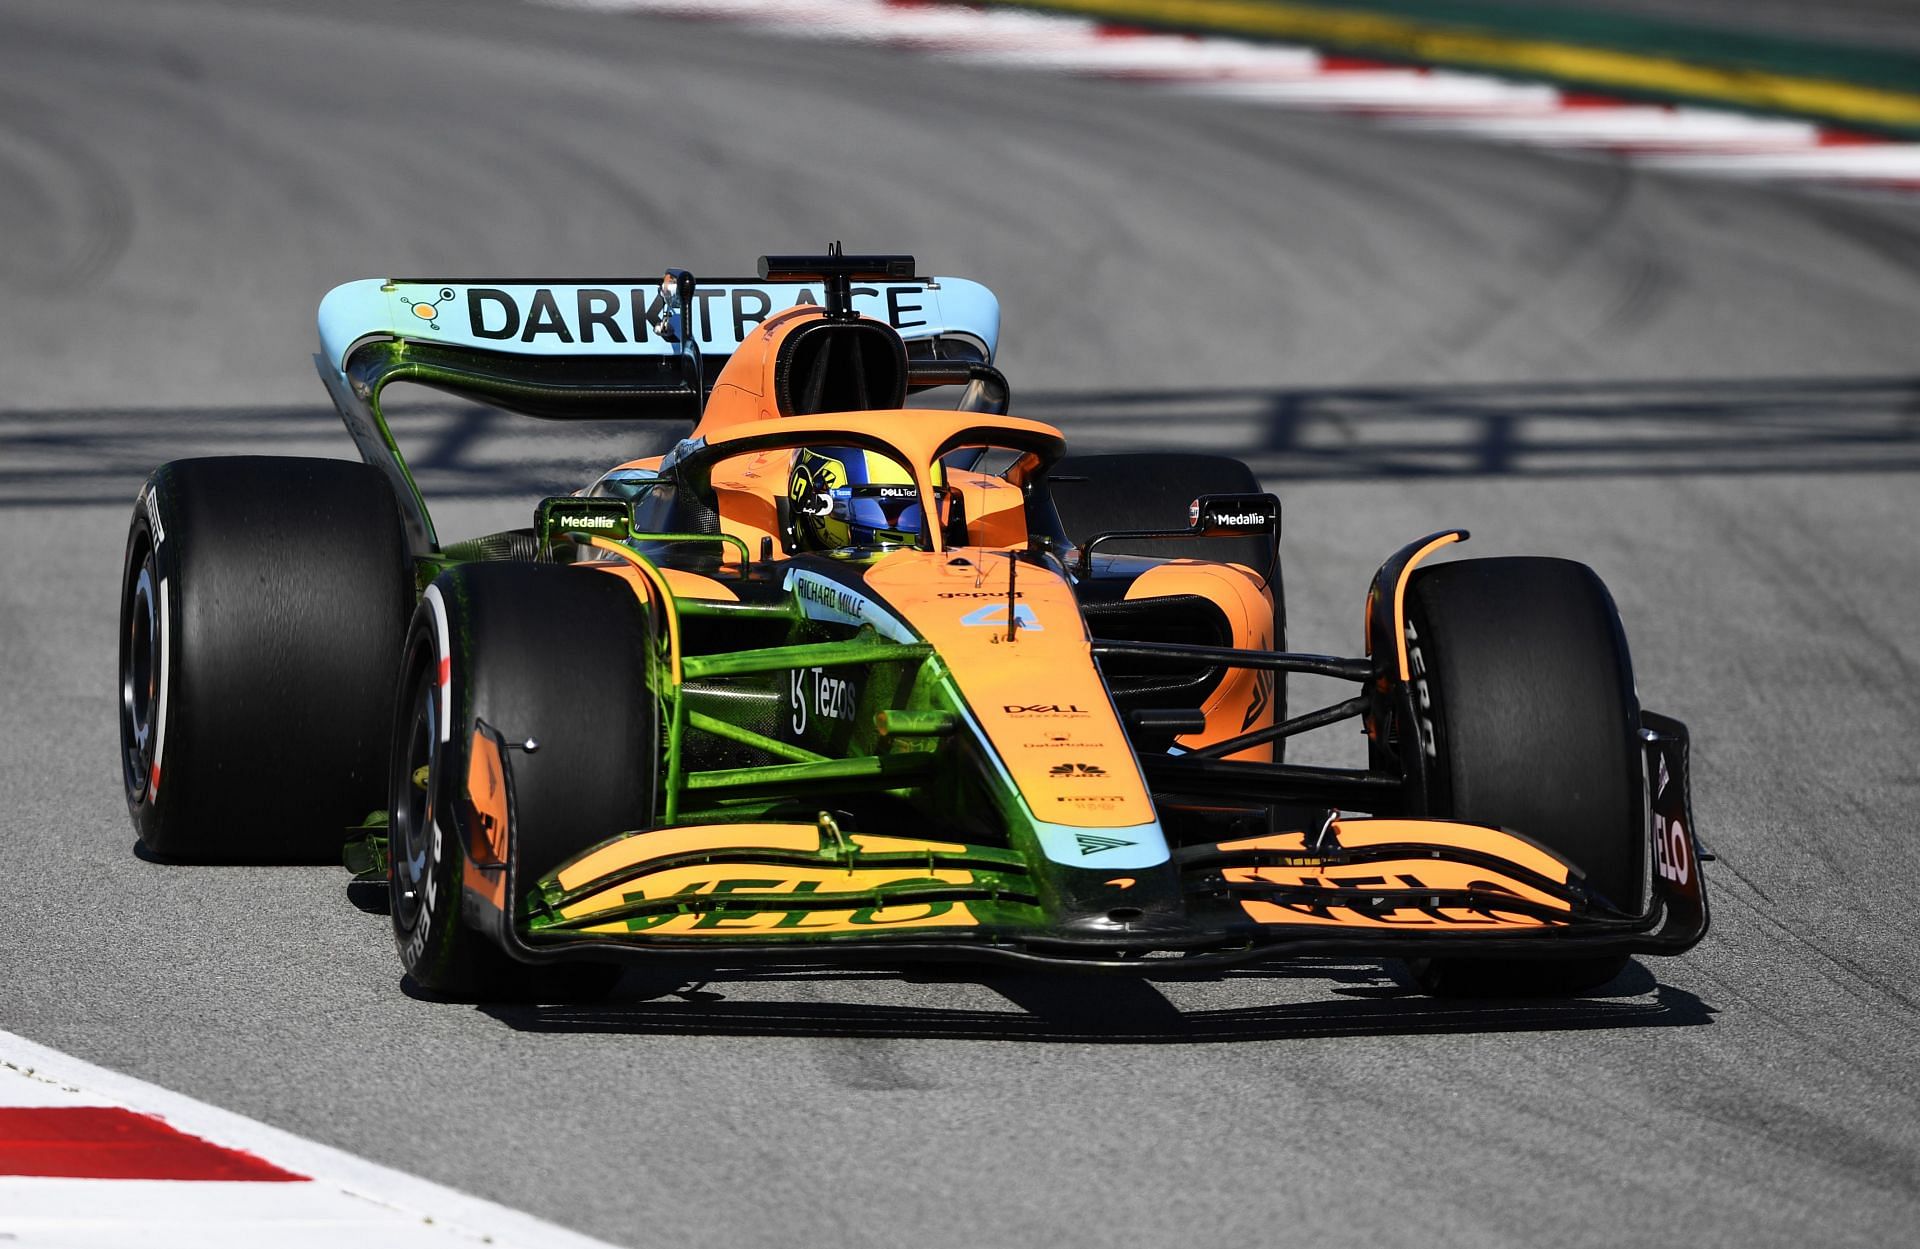 Lando Norris (#4) drives the McLaren MCL36 on day 1 of 2022 pre-season testing in Barcelona